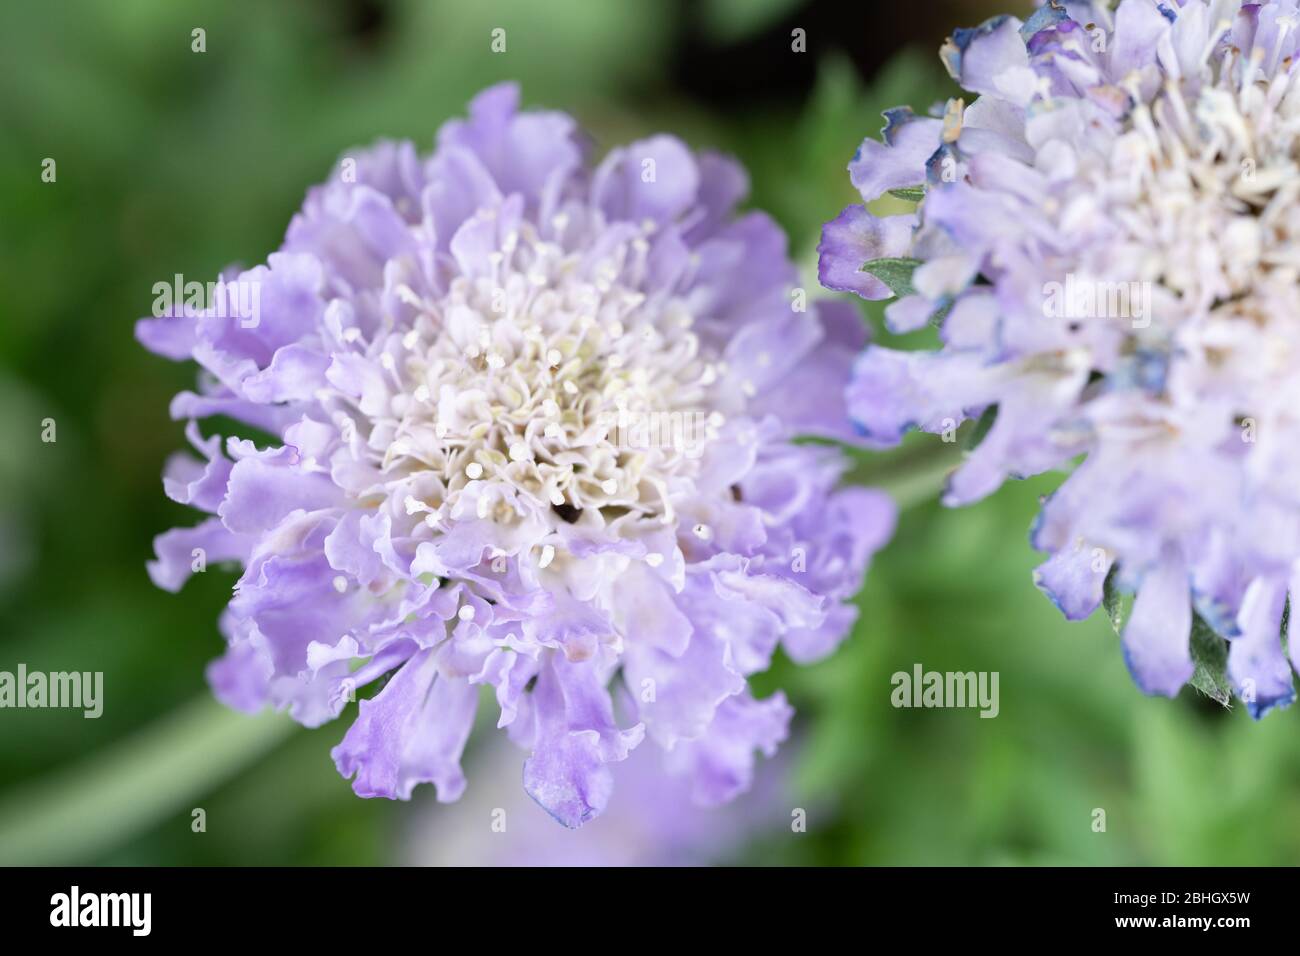 Close-up / macro photograph of Scabious / Scabiosa / pincushion flowers in a UK garden with a shallow depth of field and blurred background / bokeh Stock Photo